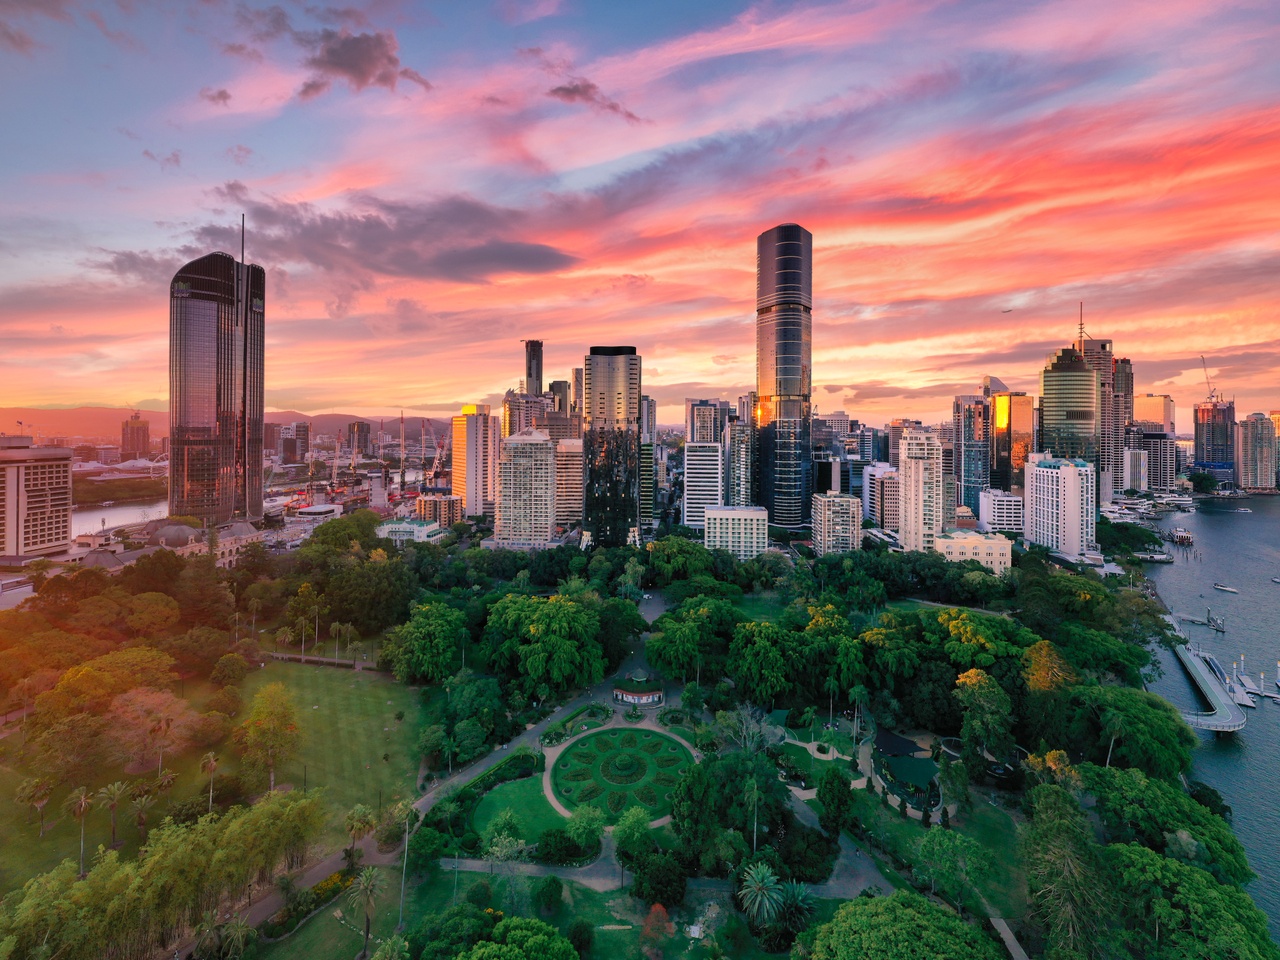 A bright pink sky frames the city skyline and rich greens of the Brisbane Botanic gardens.